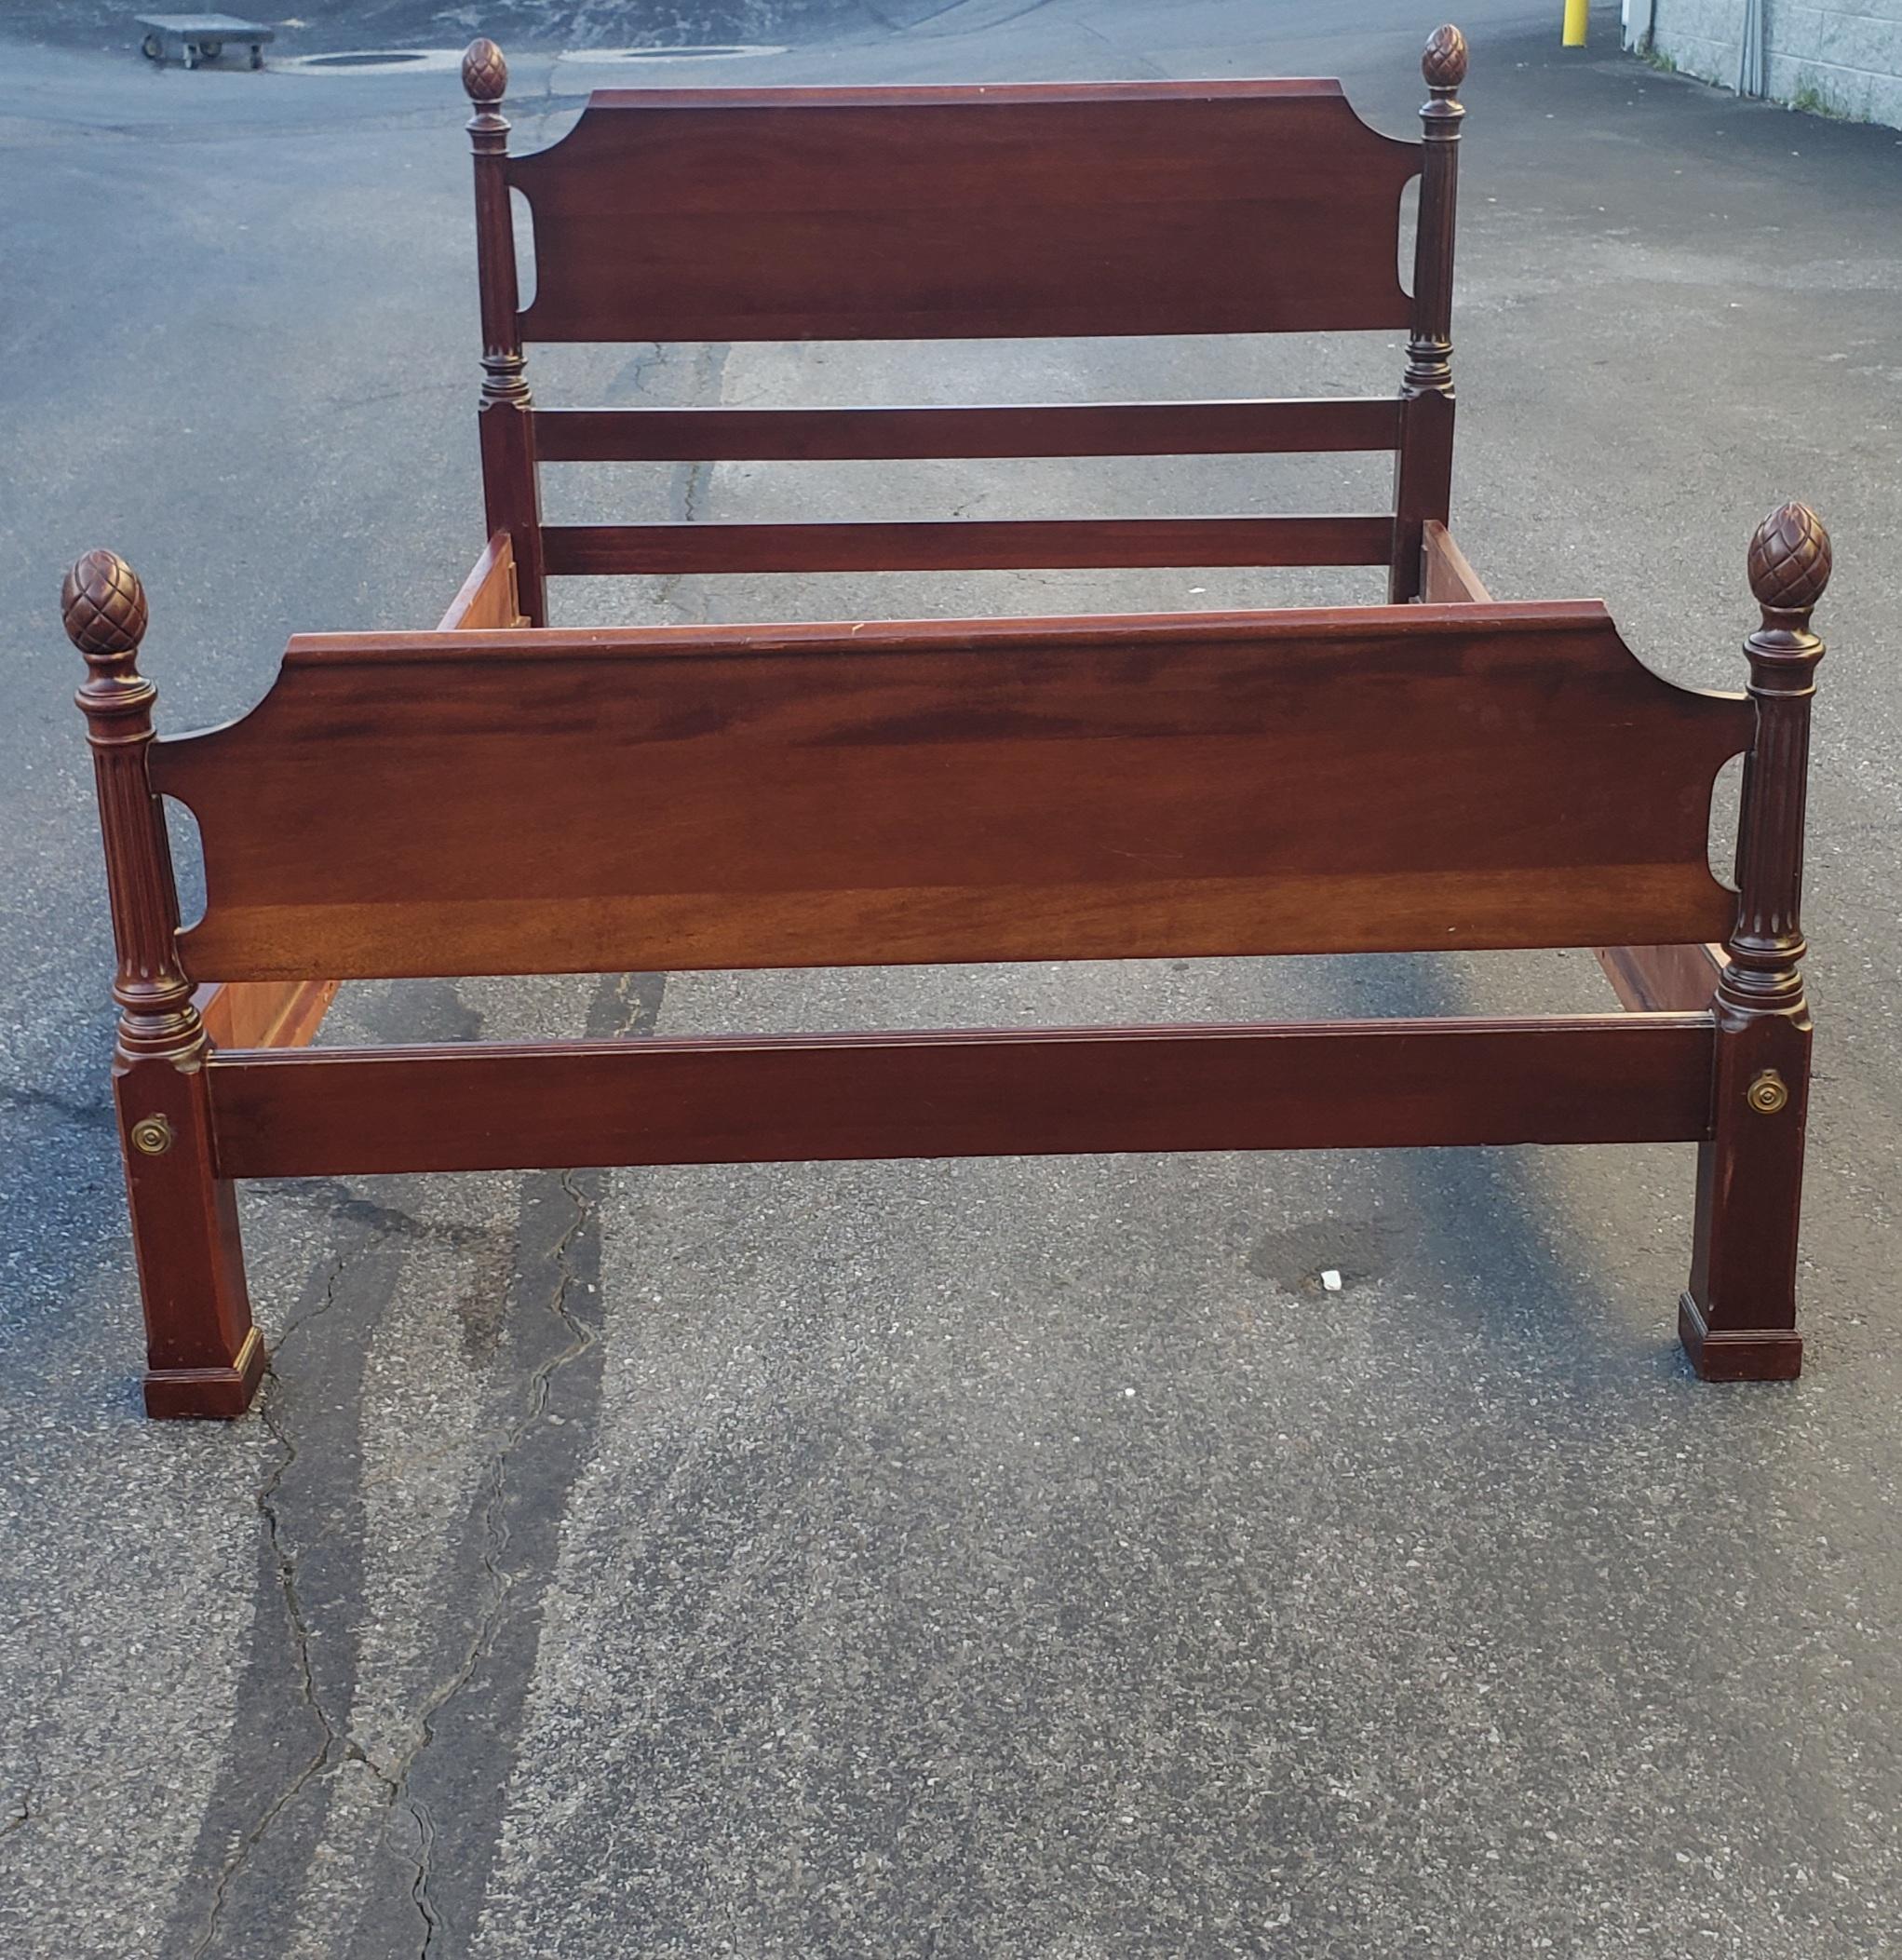 Chippendale 1980s Solid Mahogany Pineapple Full Size Bedstead For Sale